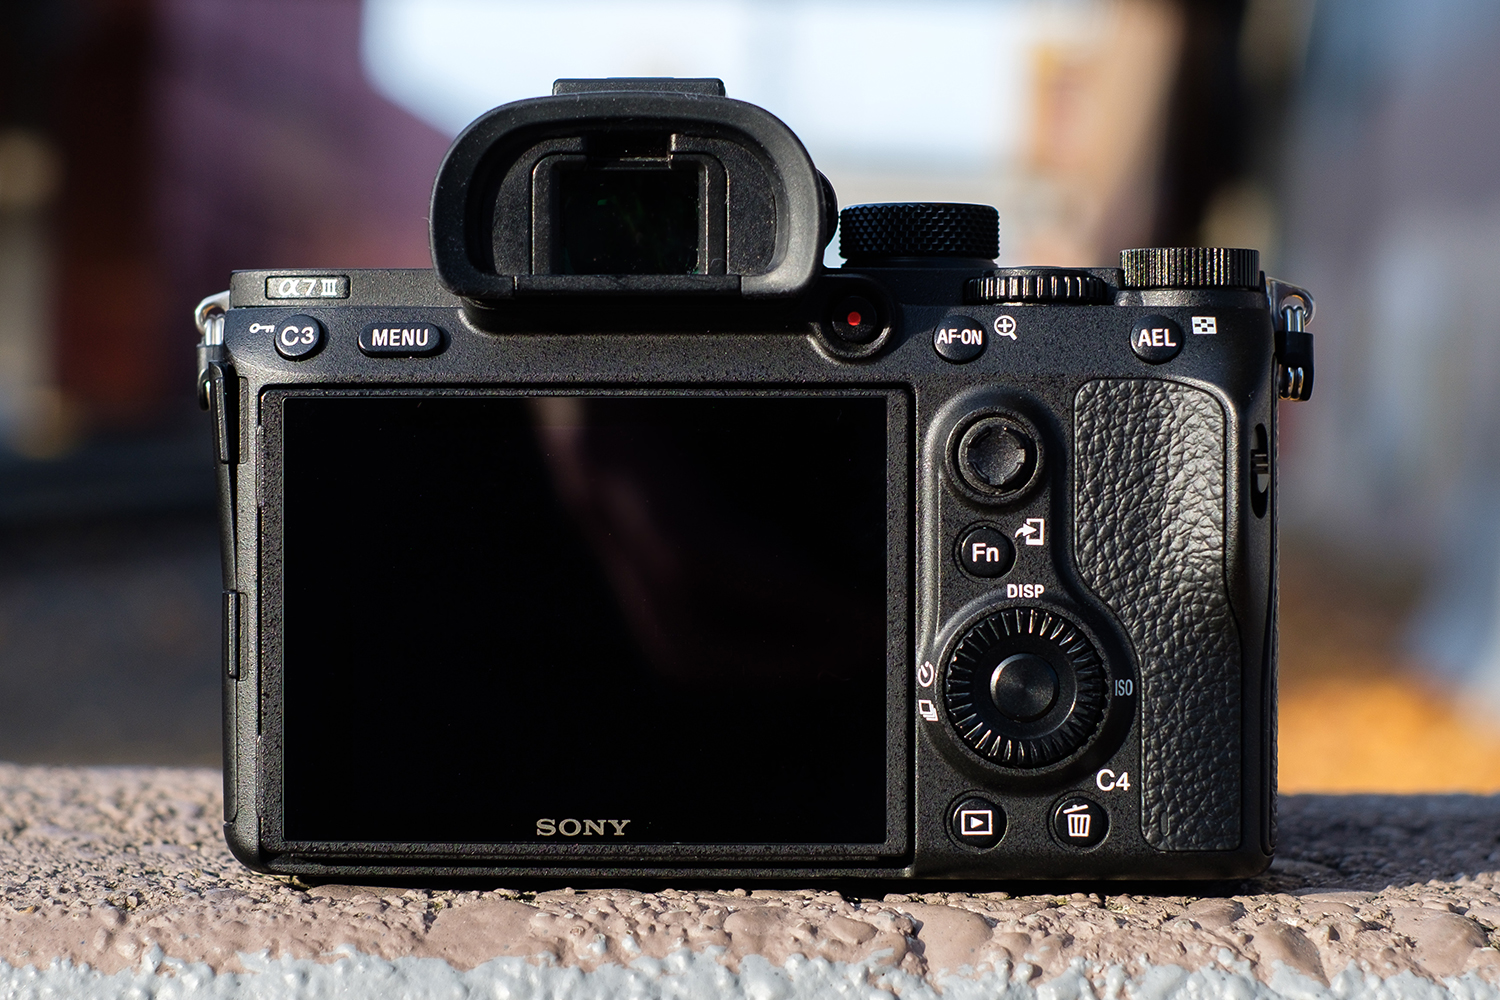 The Sony ALPHA 7 III: An entry point into mirrorless cameras